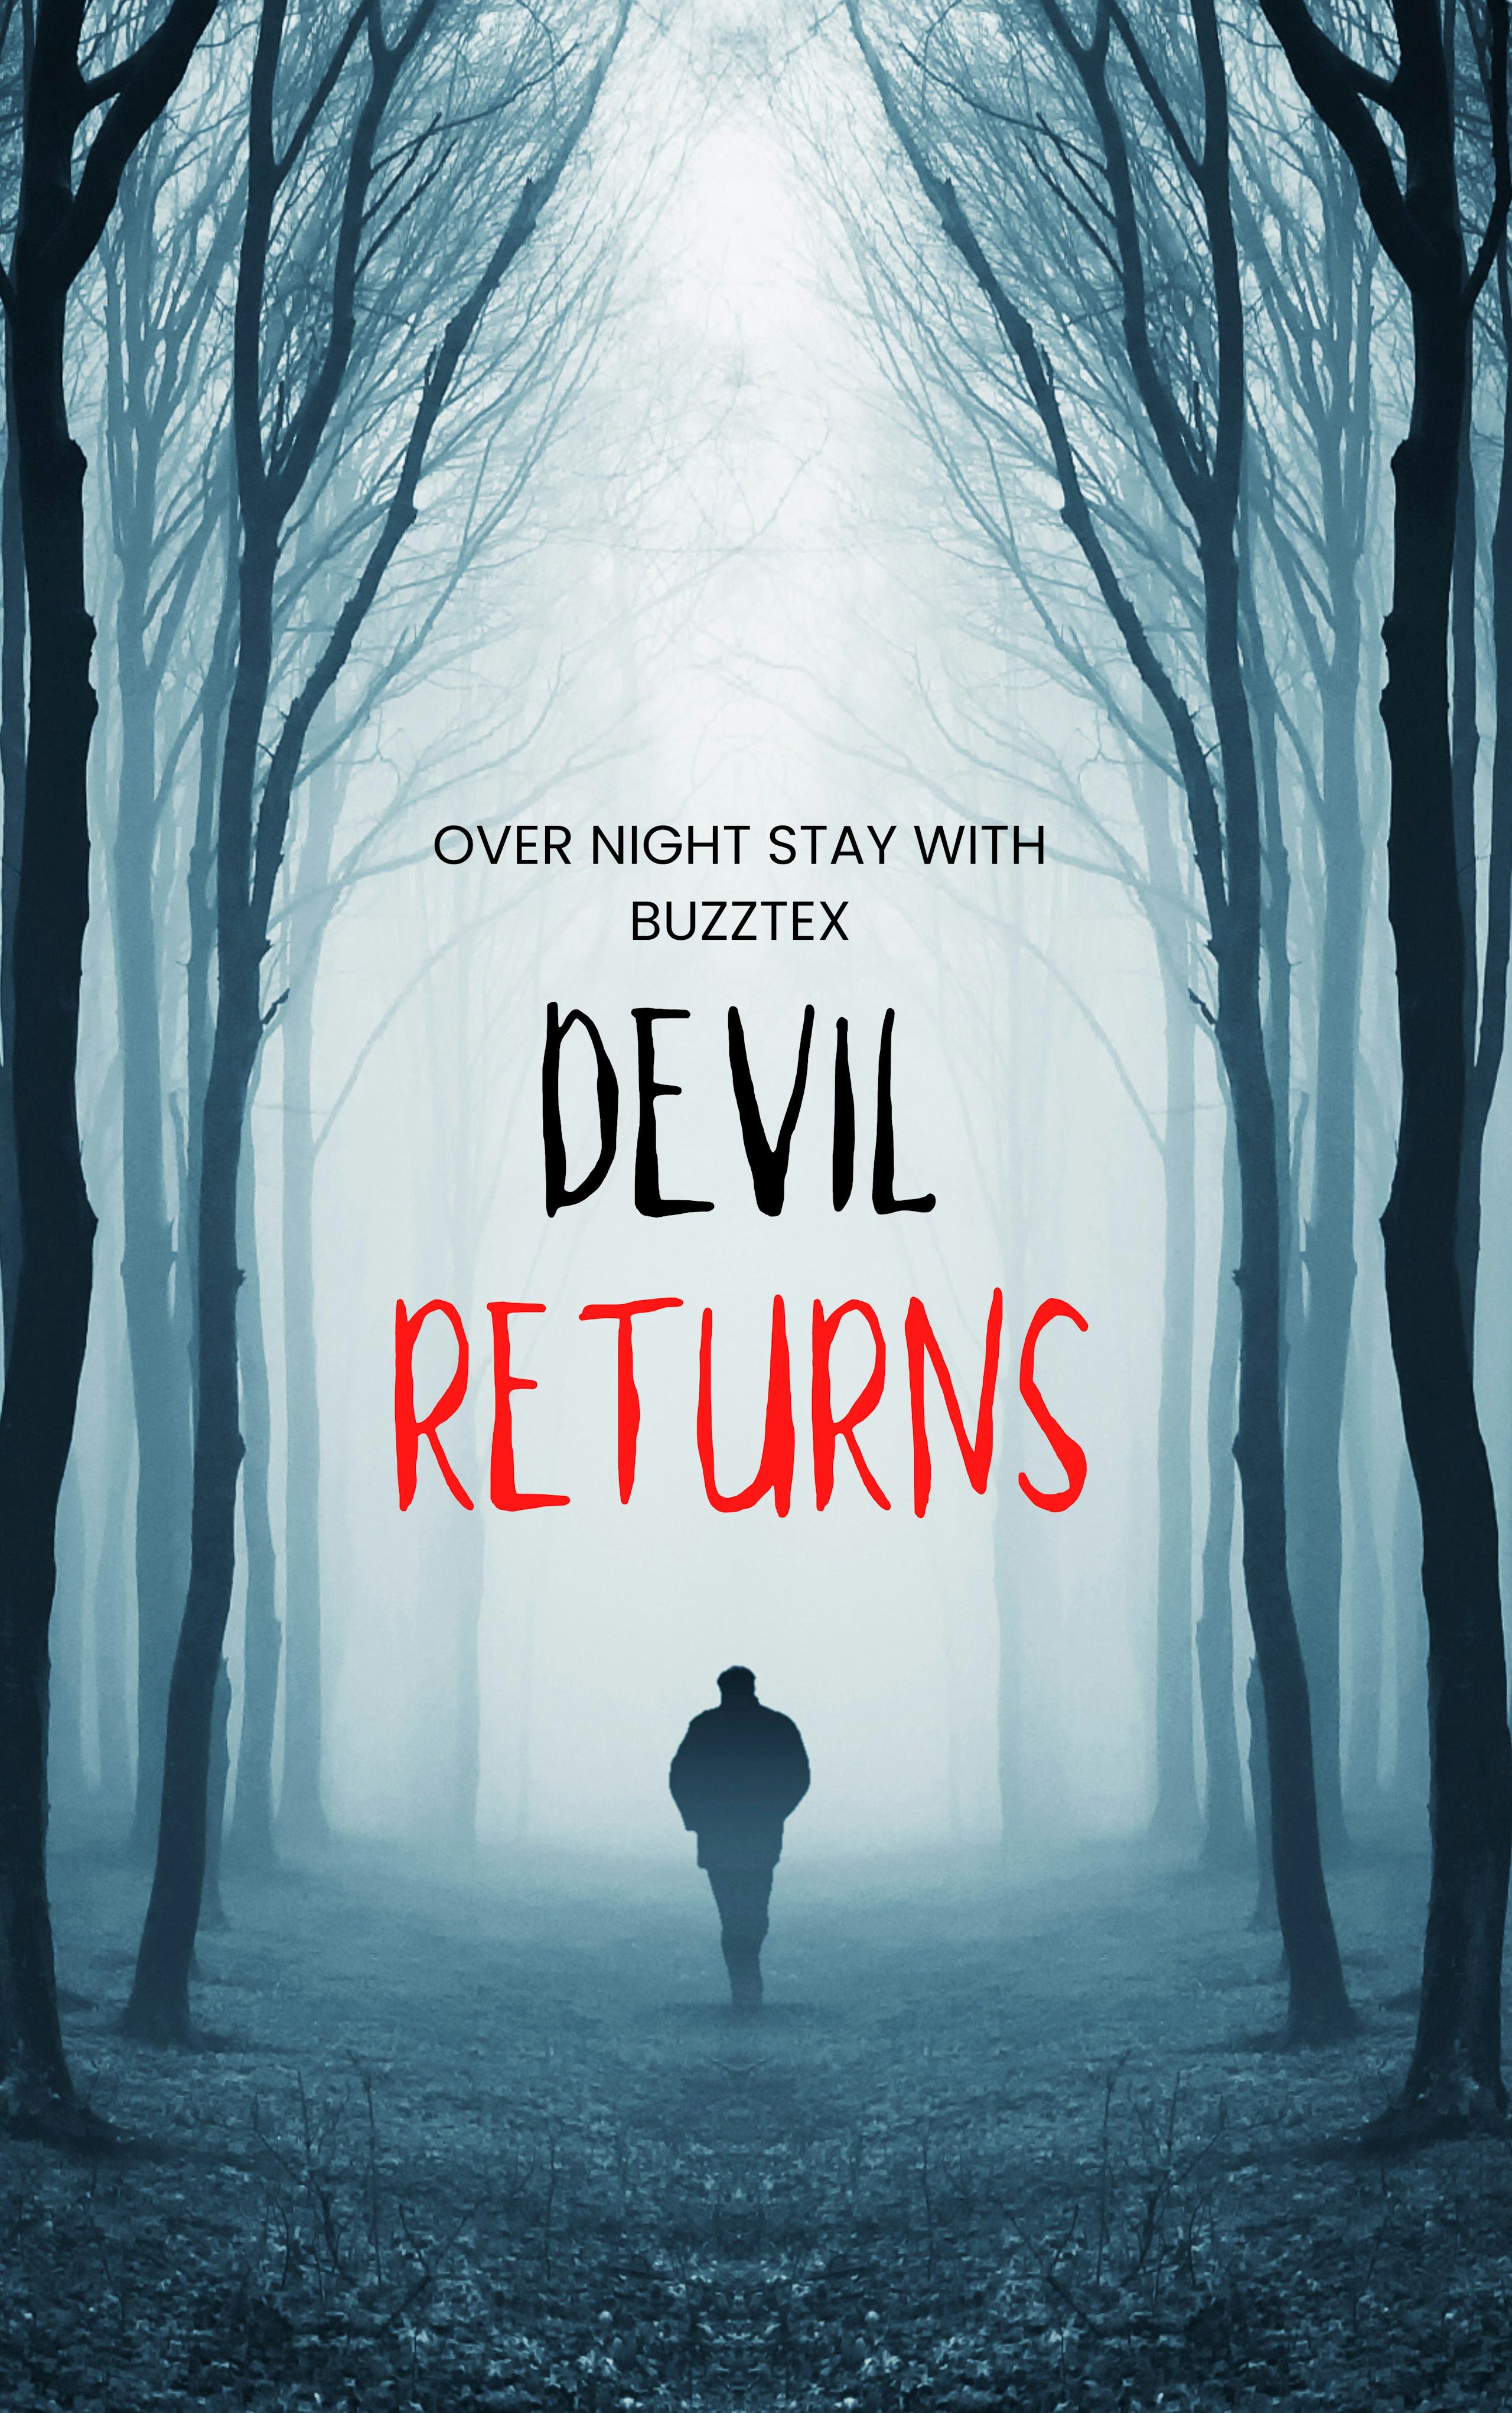 RISE OF THE DEVIL! - OVER NIGHT STAY!